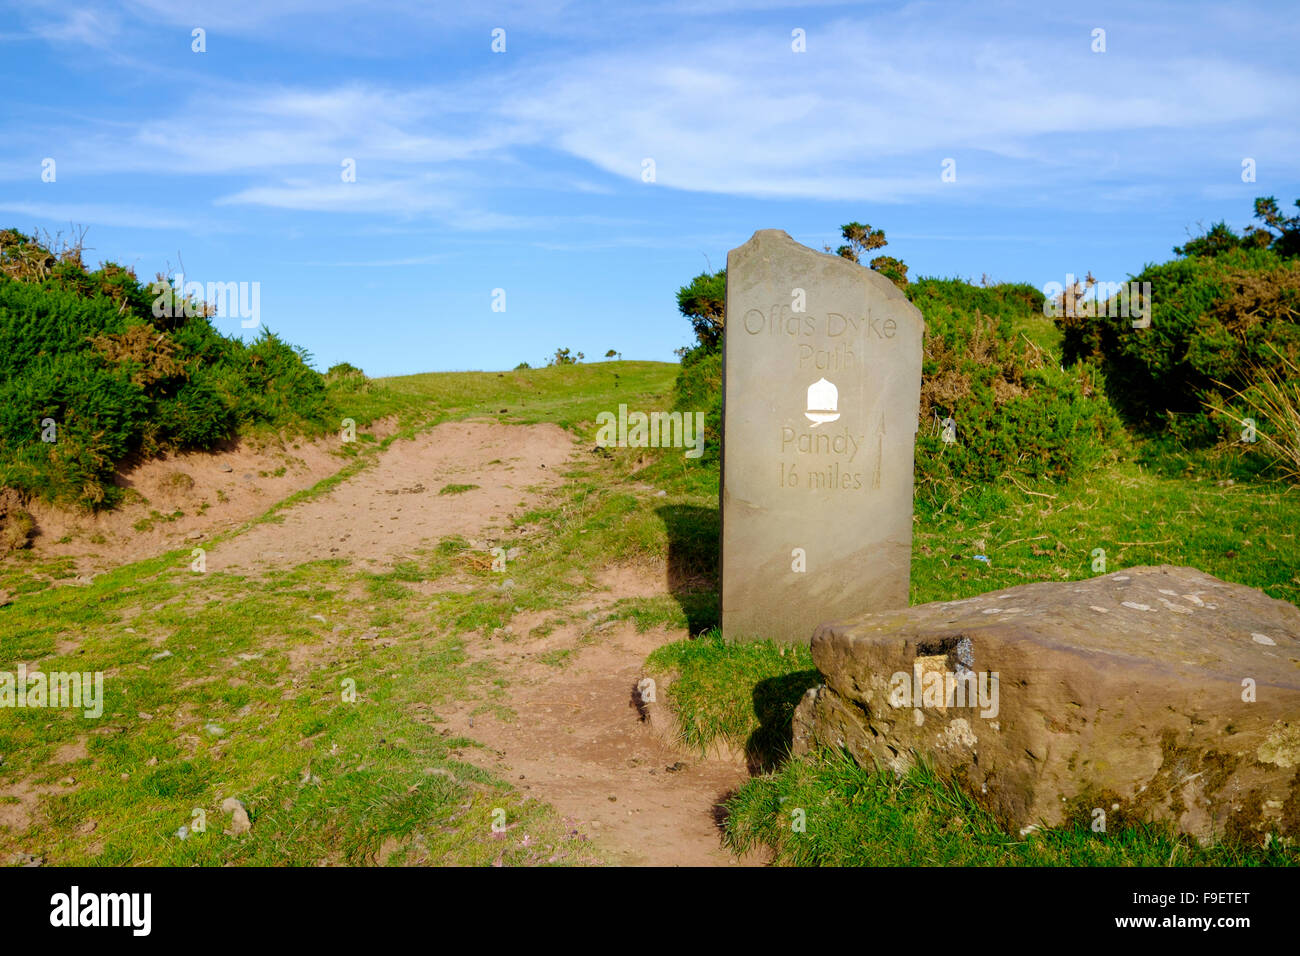 A stone marker on the Offa's Dyke national trail guides walkers in the Black mountains, Wales, UK Stock Photo